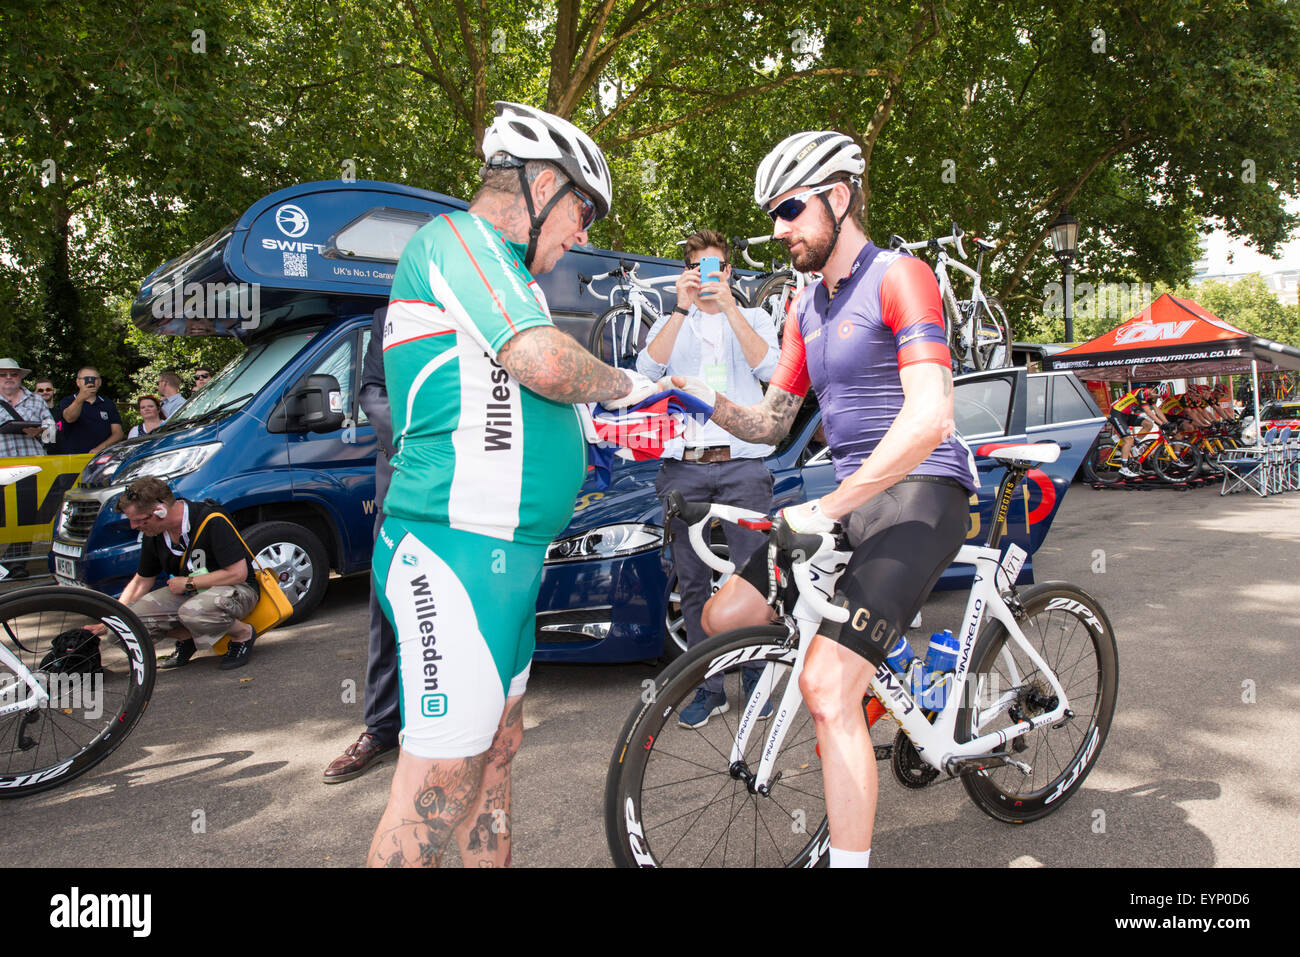 London, UK. 2nd Aug, 2015. Sir Bradley Wiggins signs a fan's cycling jersey before the Prudential RideLondon-Surrey Classic at Horse Guards Parade, London, United Kingdom on 2 August 2015. The race started at Horse Guards Parade and will finish on The Mall after a 200km route around Surrey and Greater London. Credit:  Andrew Peat/Alamy Live News Stock Photo